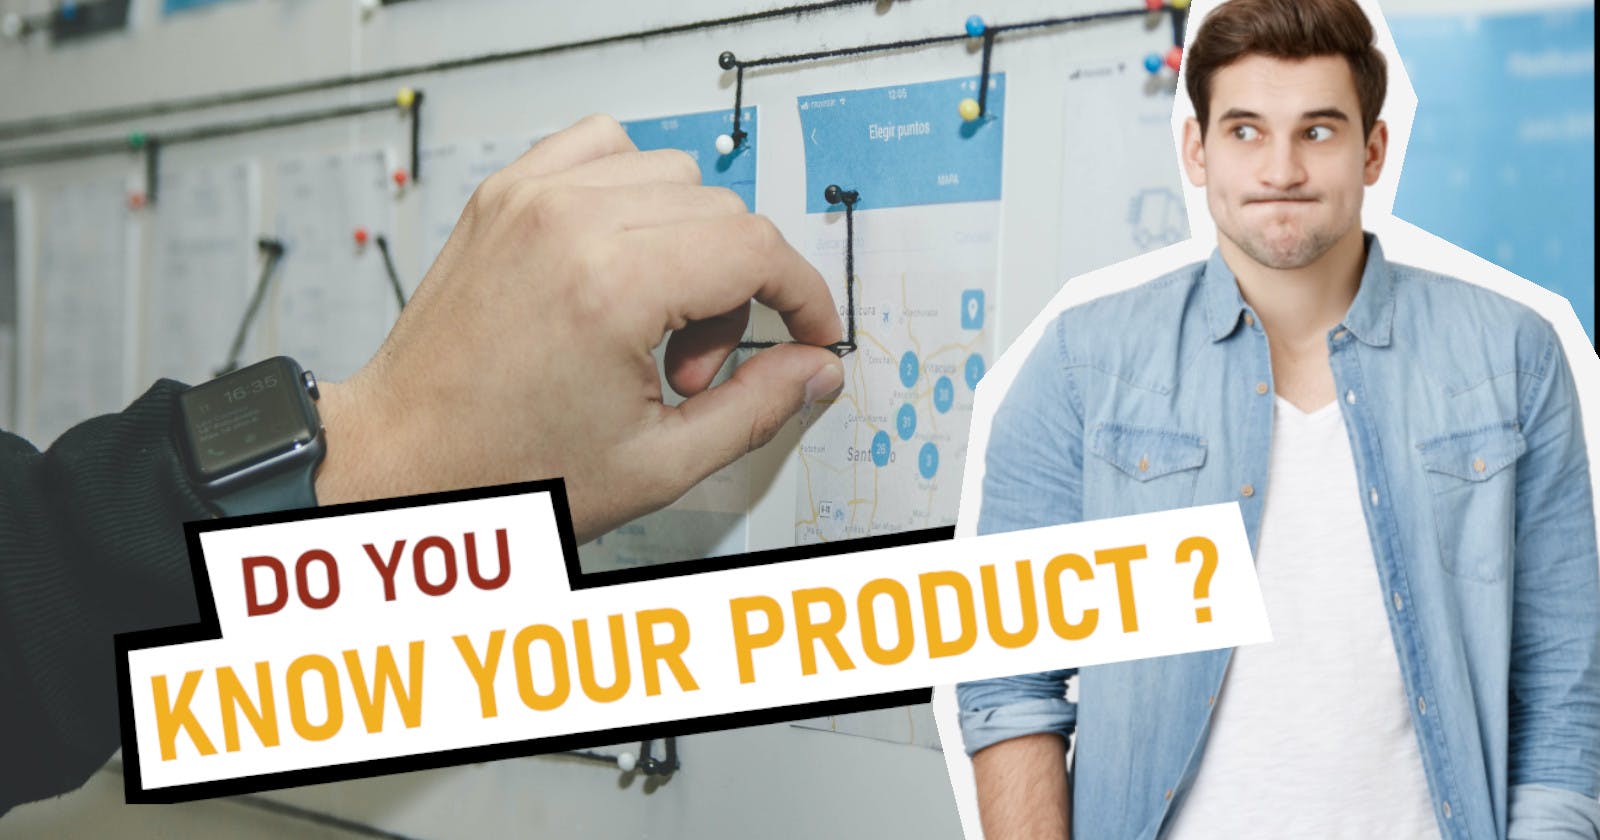 Product teams, do you know your product?